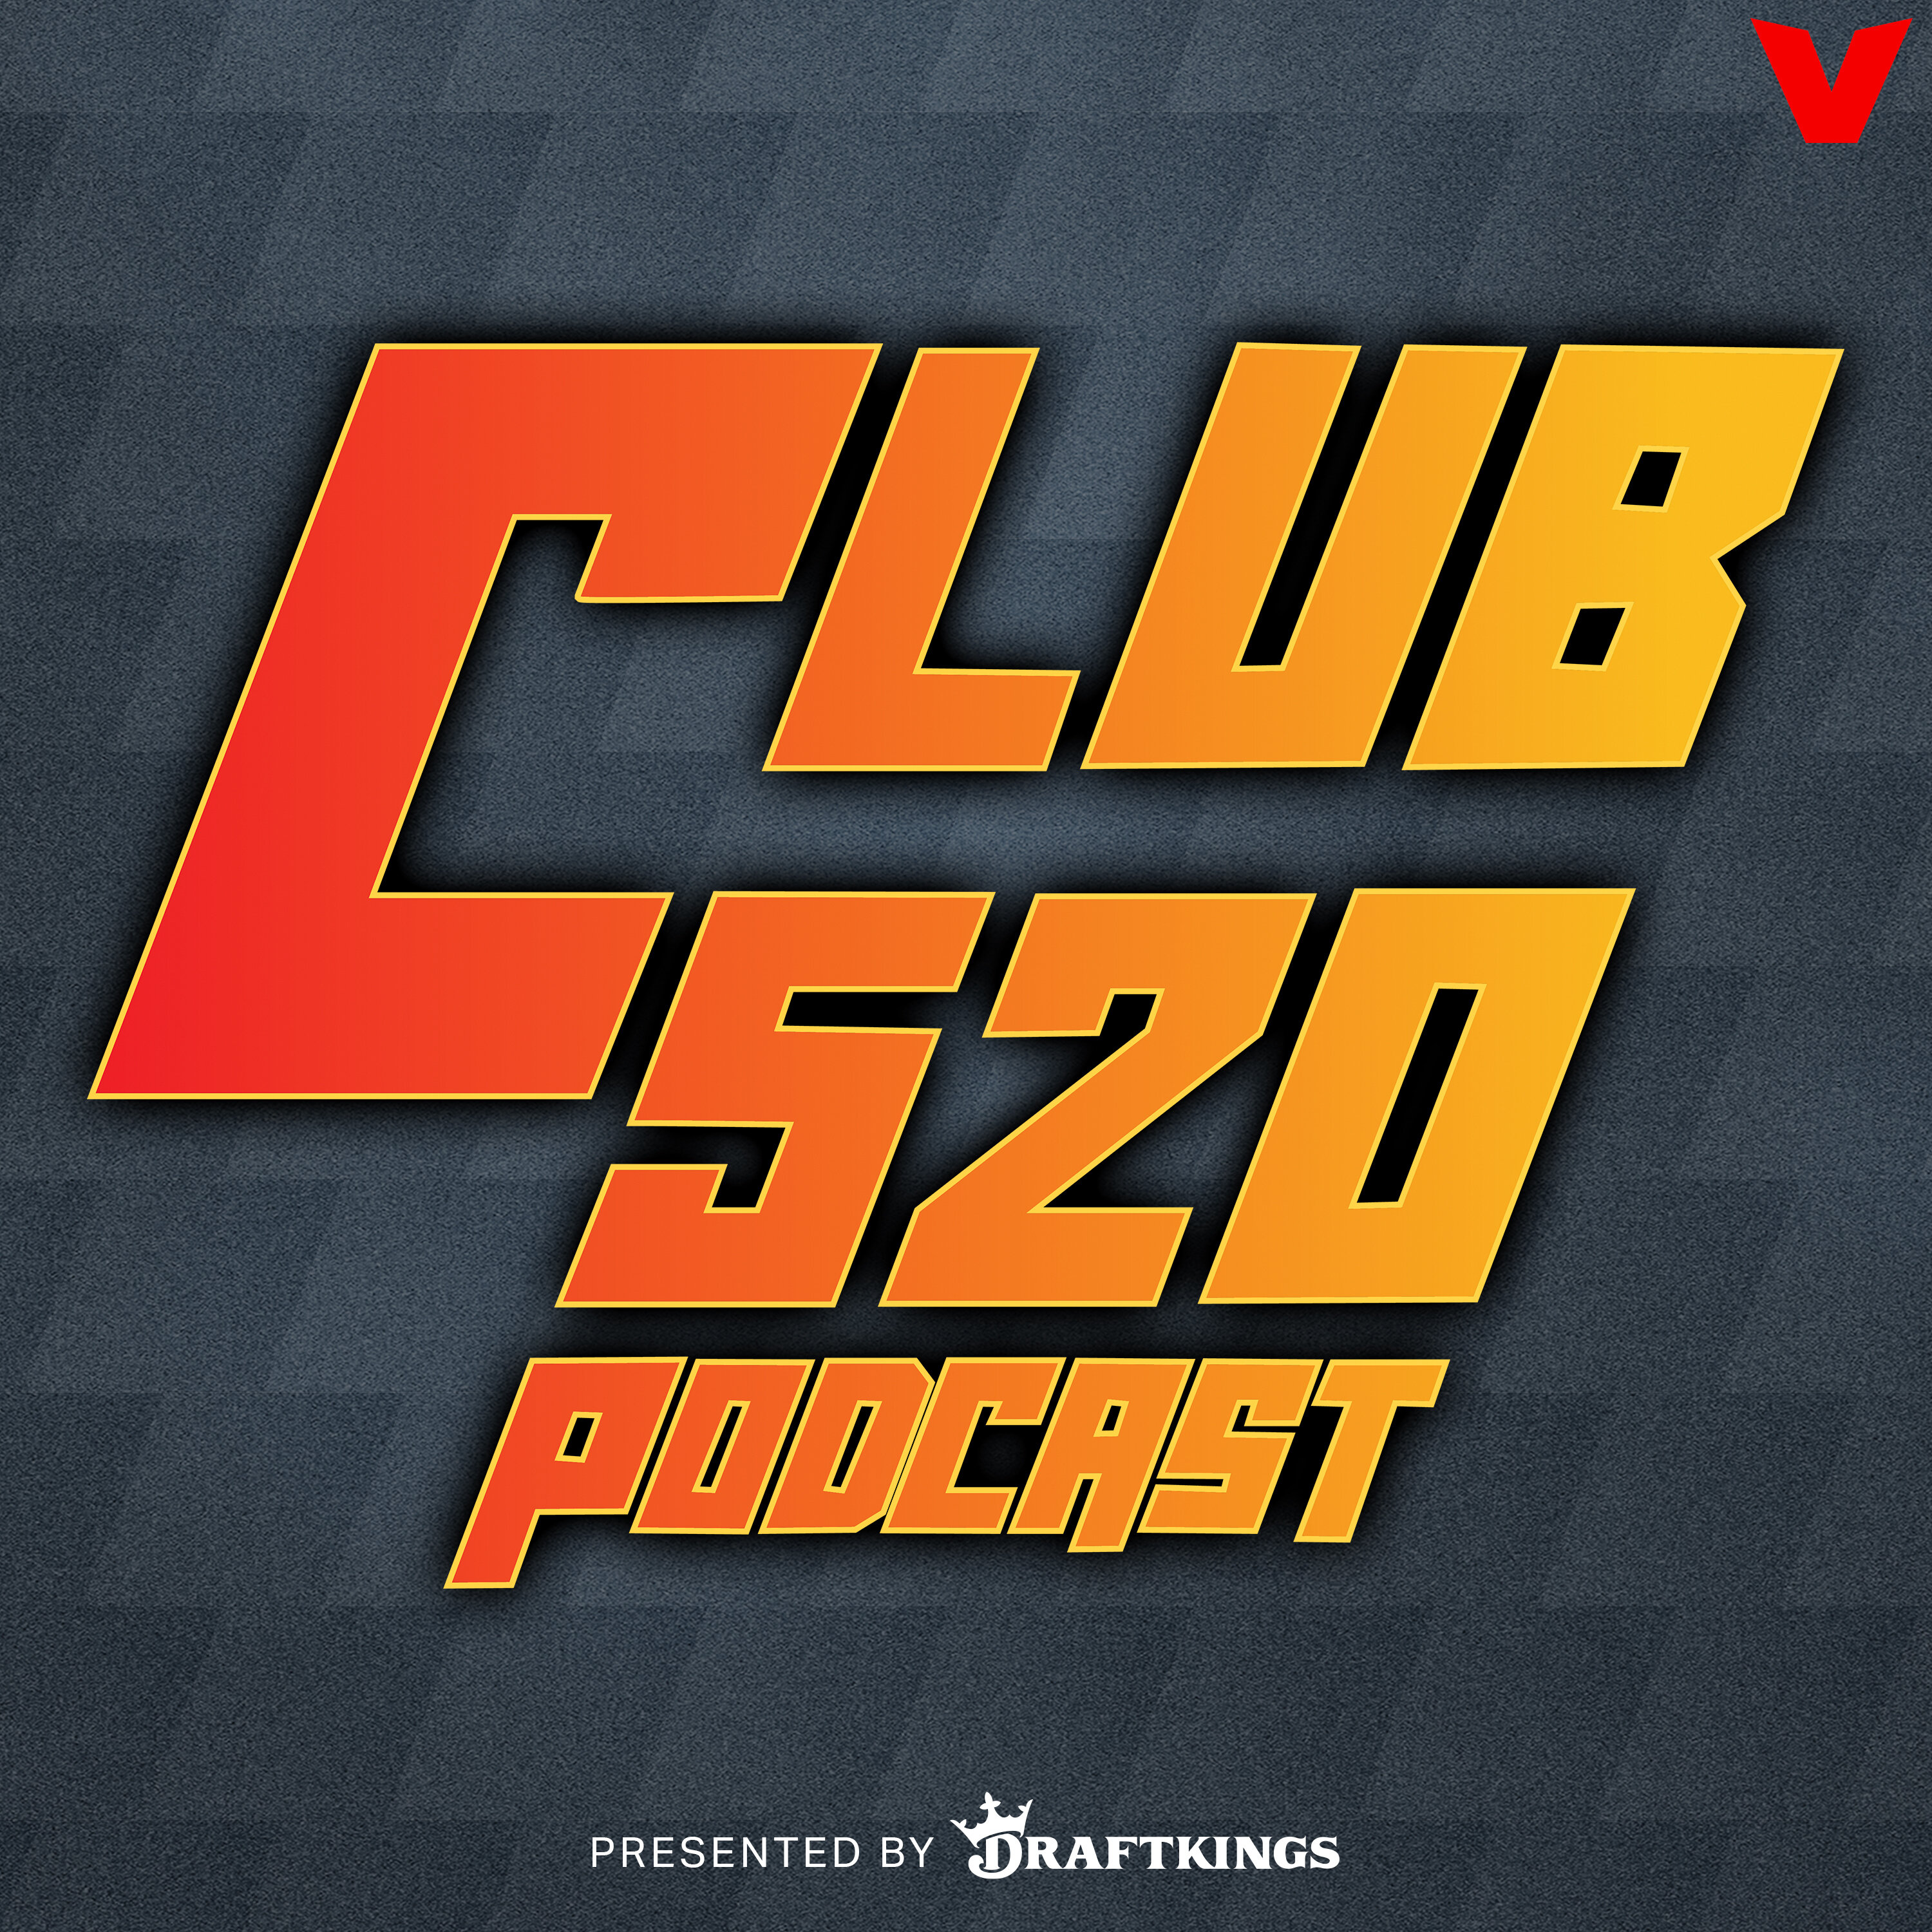 Club 520 - Jeff Teague on March Madness, John Calipari FAILING Kentucky, Drake-Future beef by iHeartPodcasts and The Volume